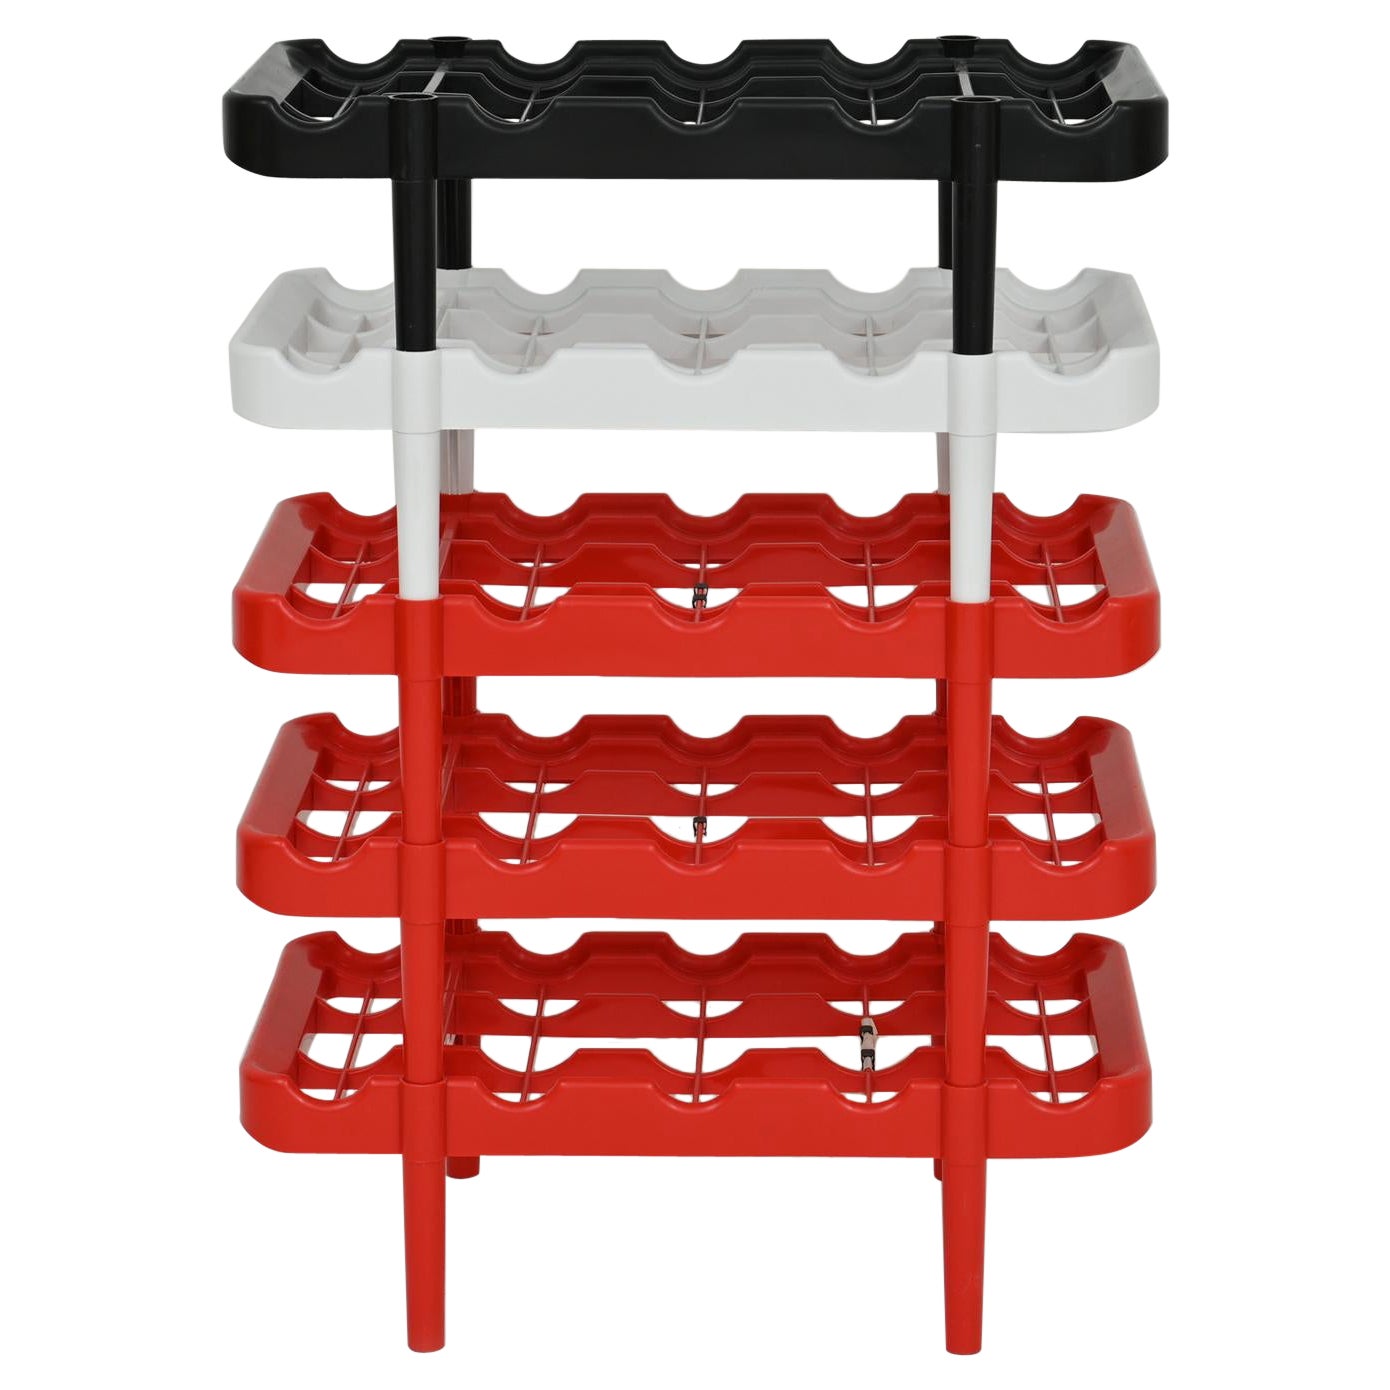 1970s Modular Stacking Red-Black-White Colorway Wine Rack by Kartell